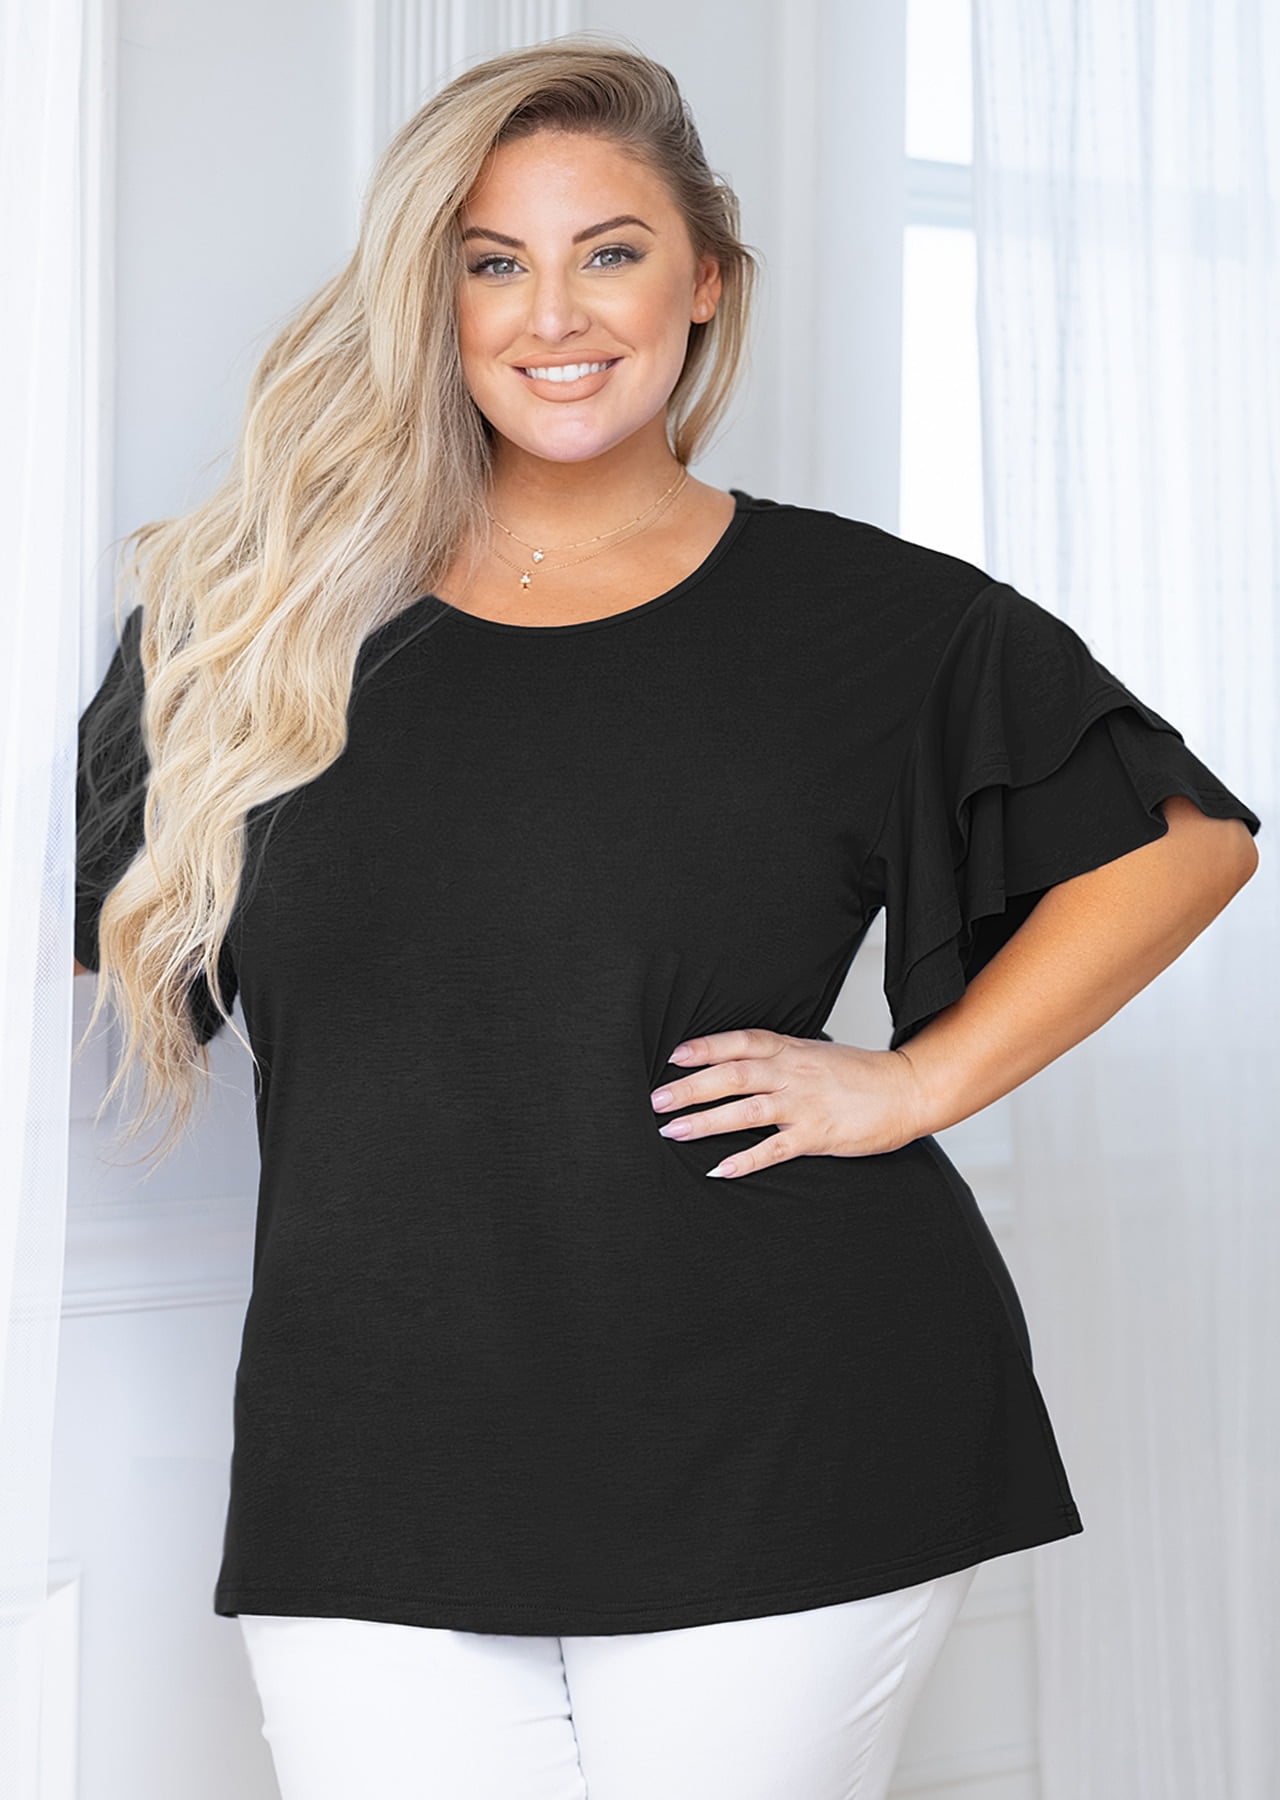 Plus Size Tops Black Blouses for Women Summer Loose-fit T - Import It All